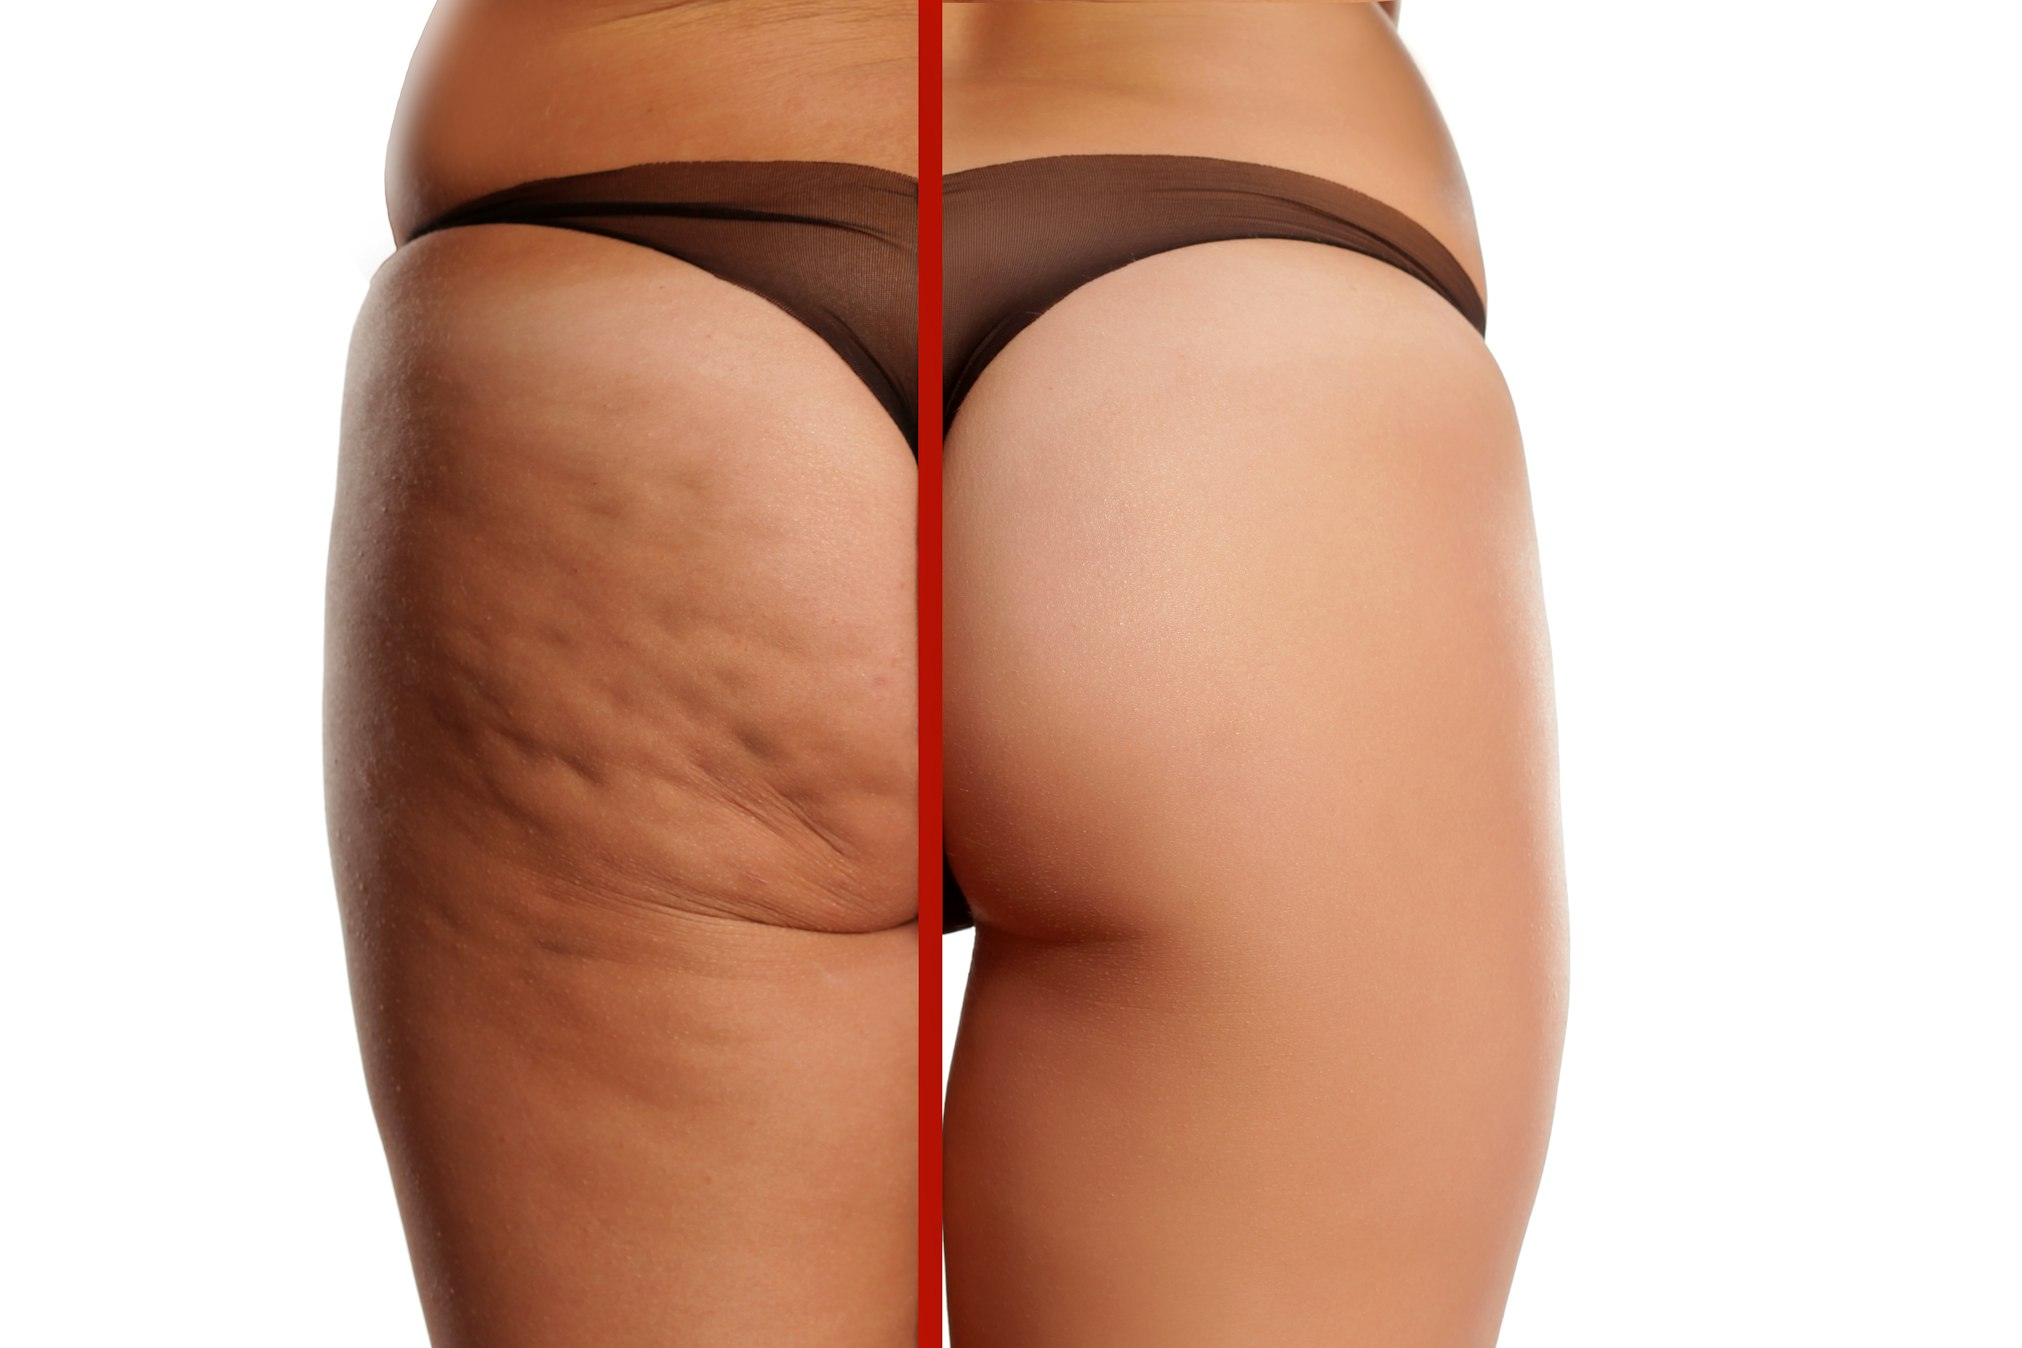 AirSculpt® Smooth Cellulite Removal: Can I Get It Alone?